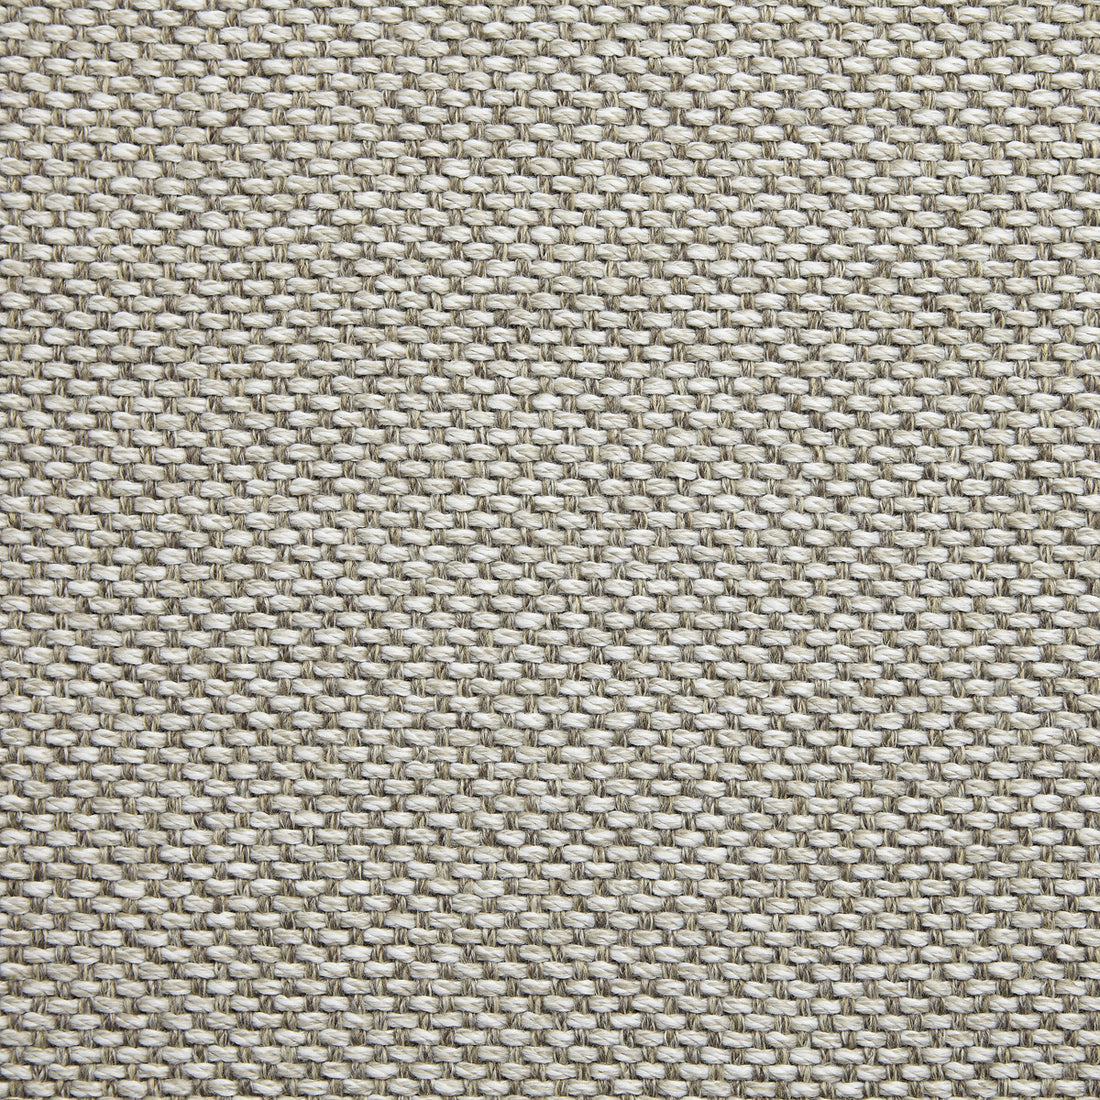 Begur fabric in 16 color - pattern LZ-30397.16.0 - by Kravet Design in the Lizzo Indoor/Outdoor collection